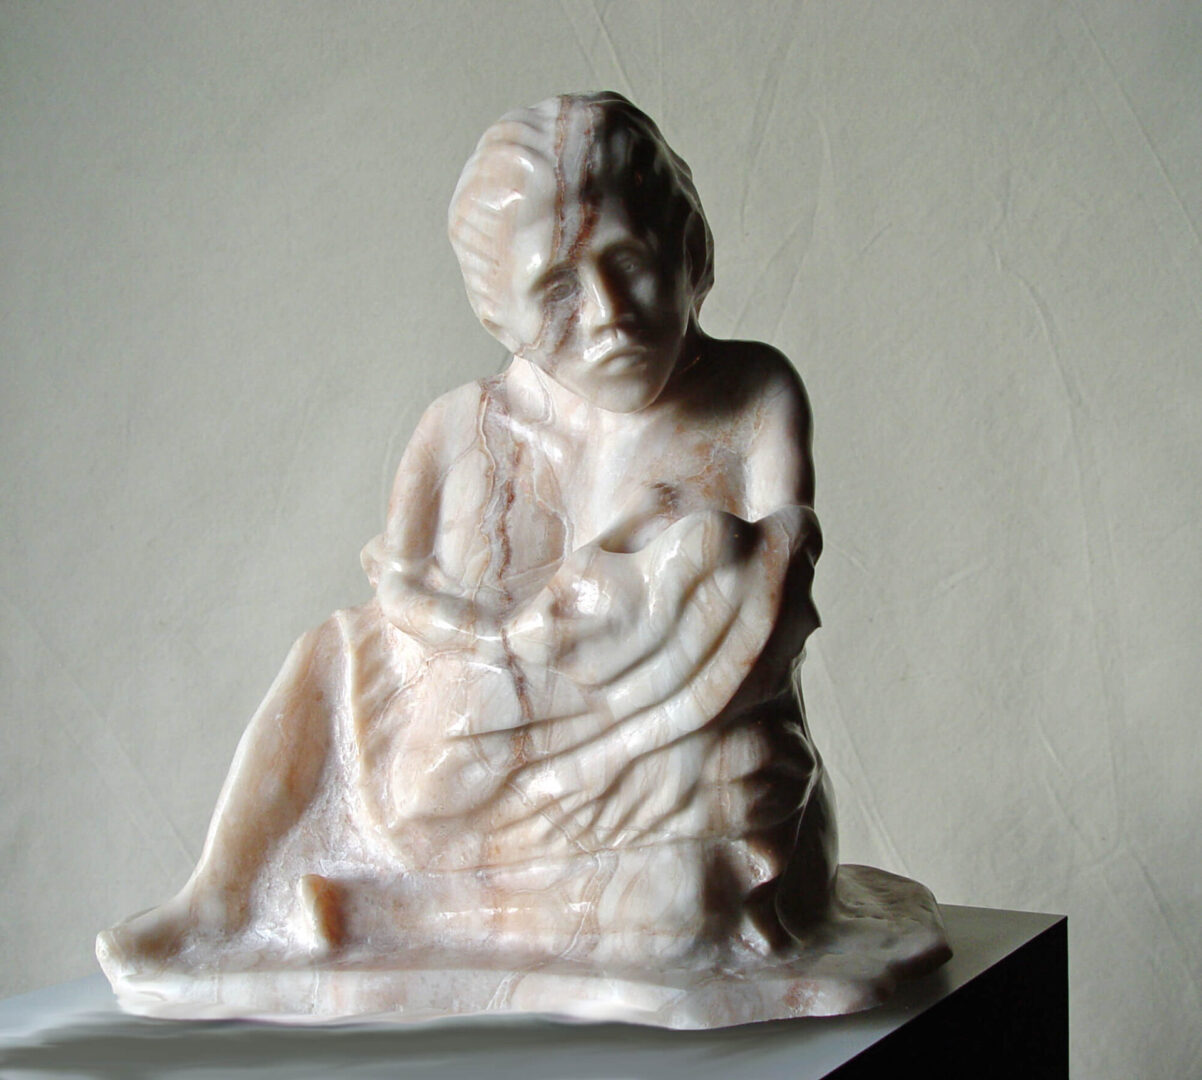 A marble statue of an old man holding a baby.